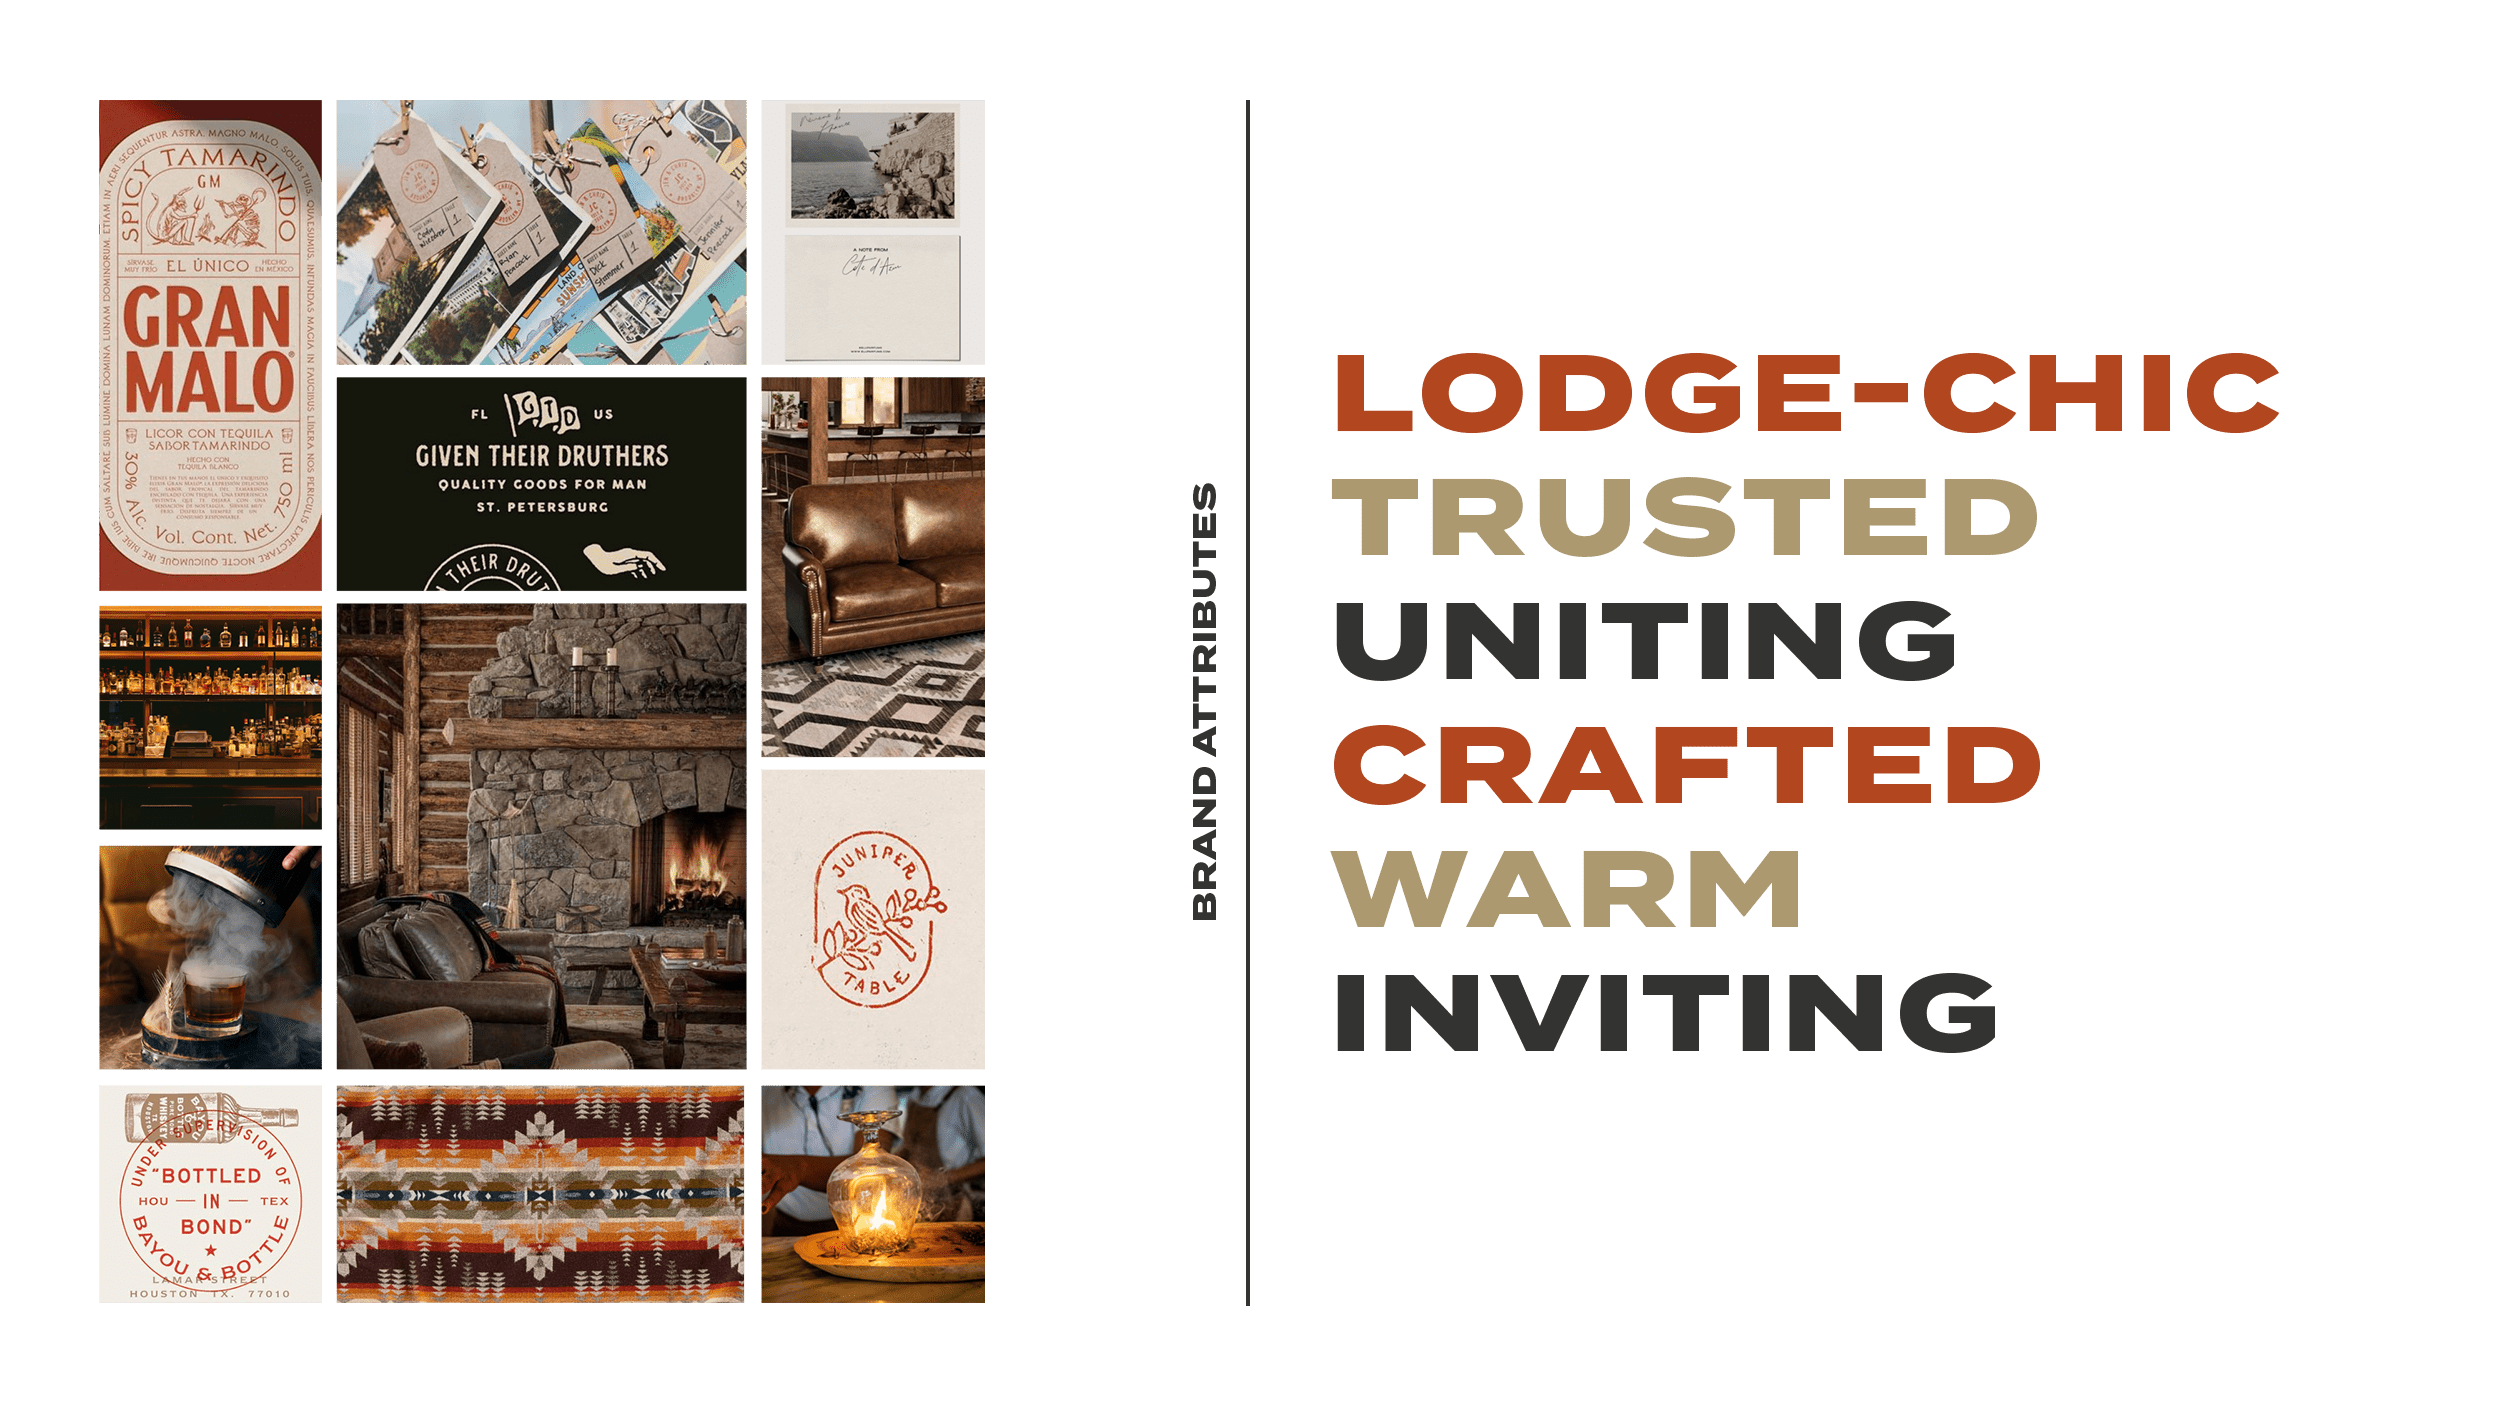 Brand attributes: lodge-chic, trusted, uniting, crafted, warm, and inviting